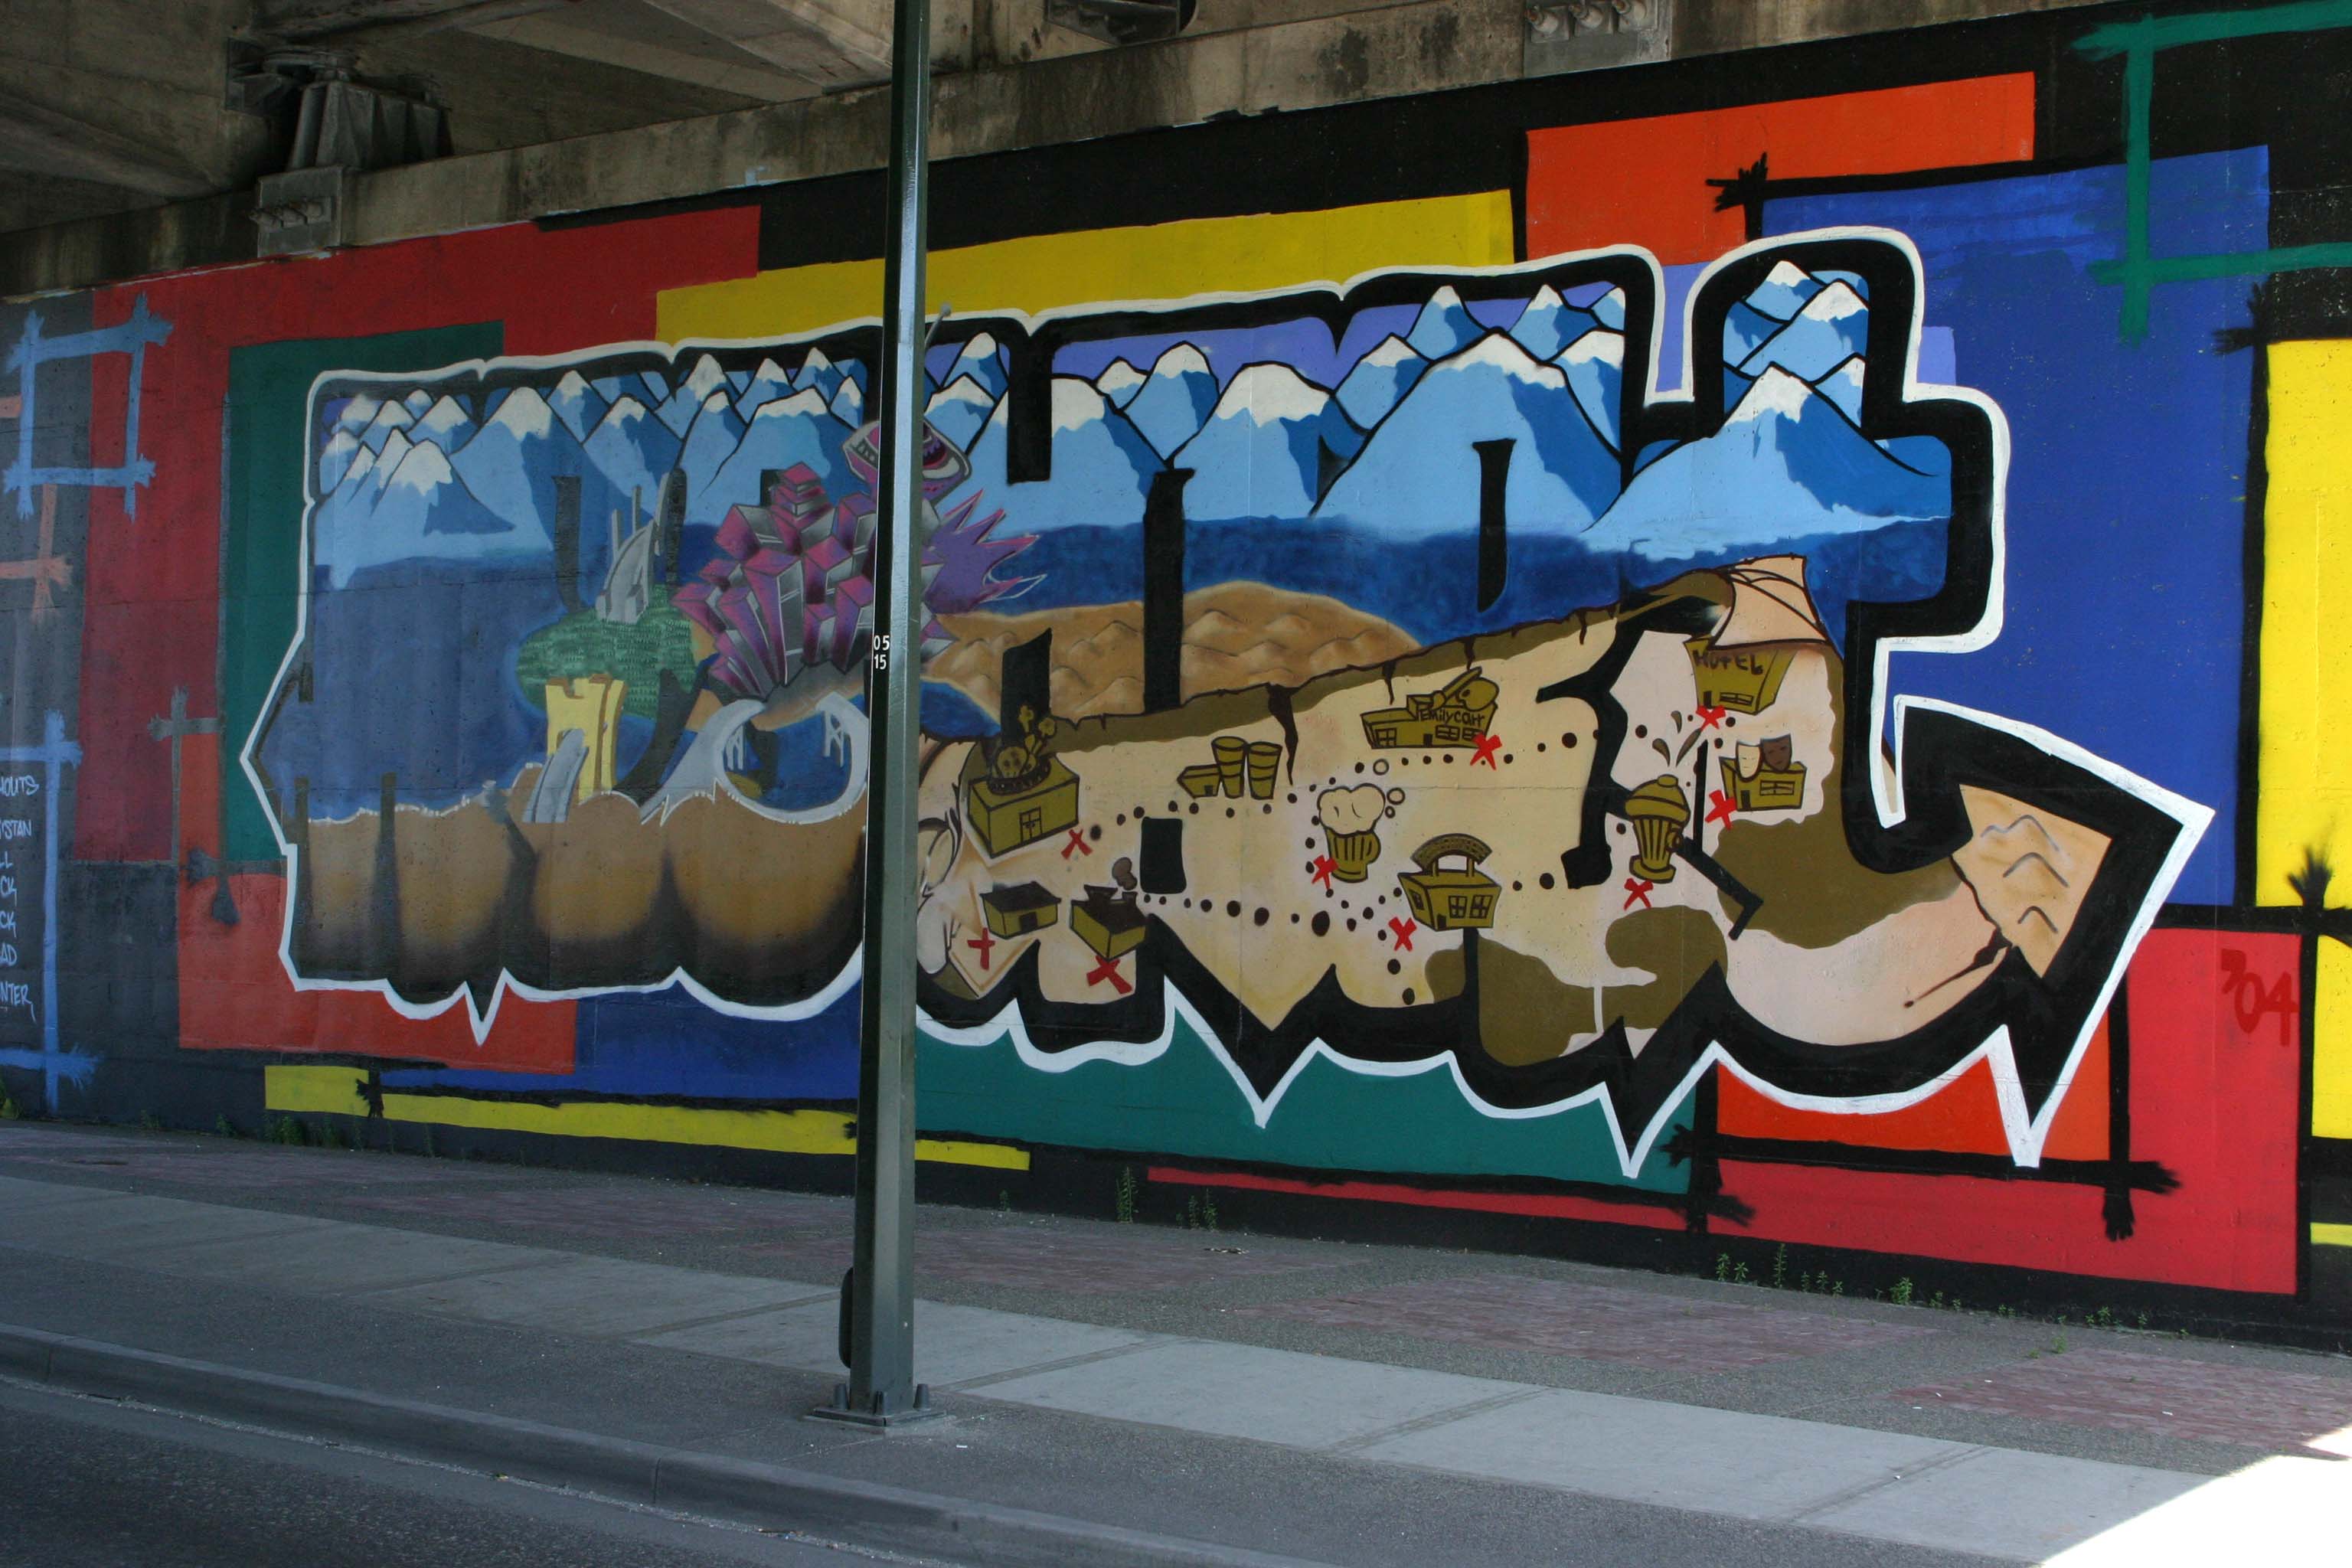 Underpass at Entrance to Granville Island - North Side